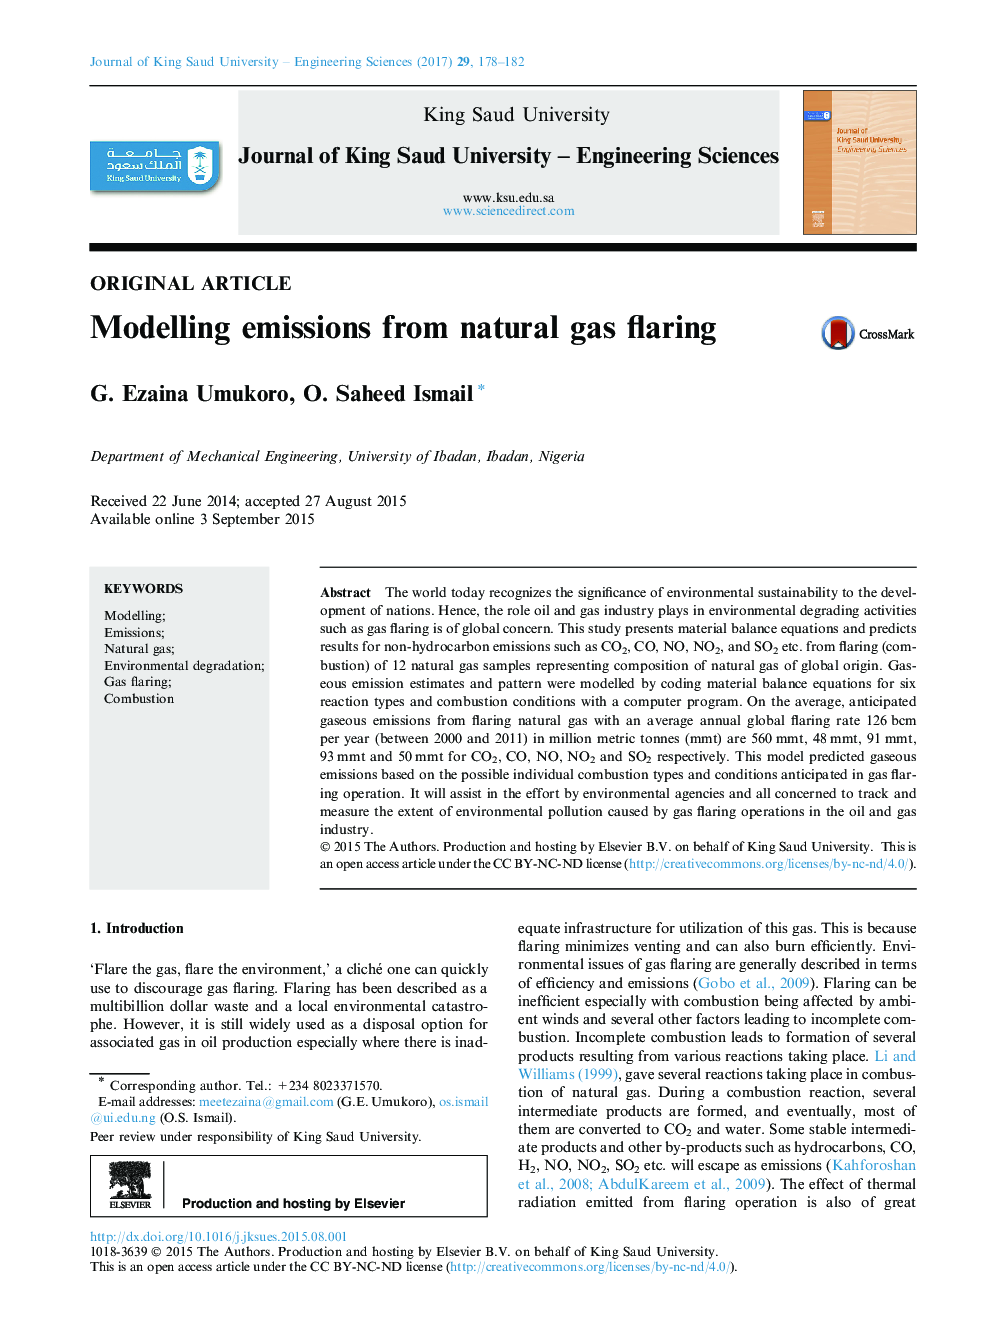 Modelling emissions from natural gas flaring